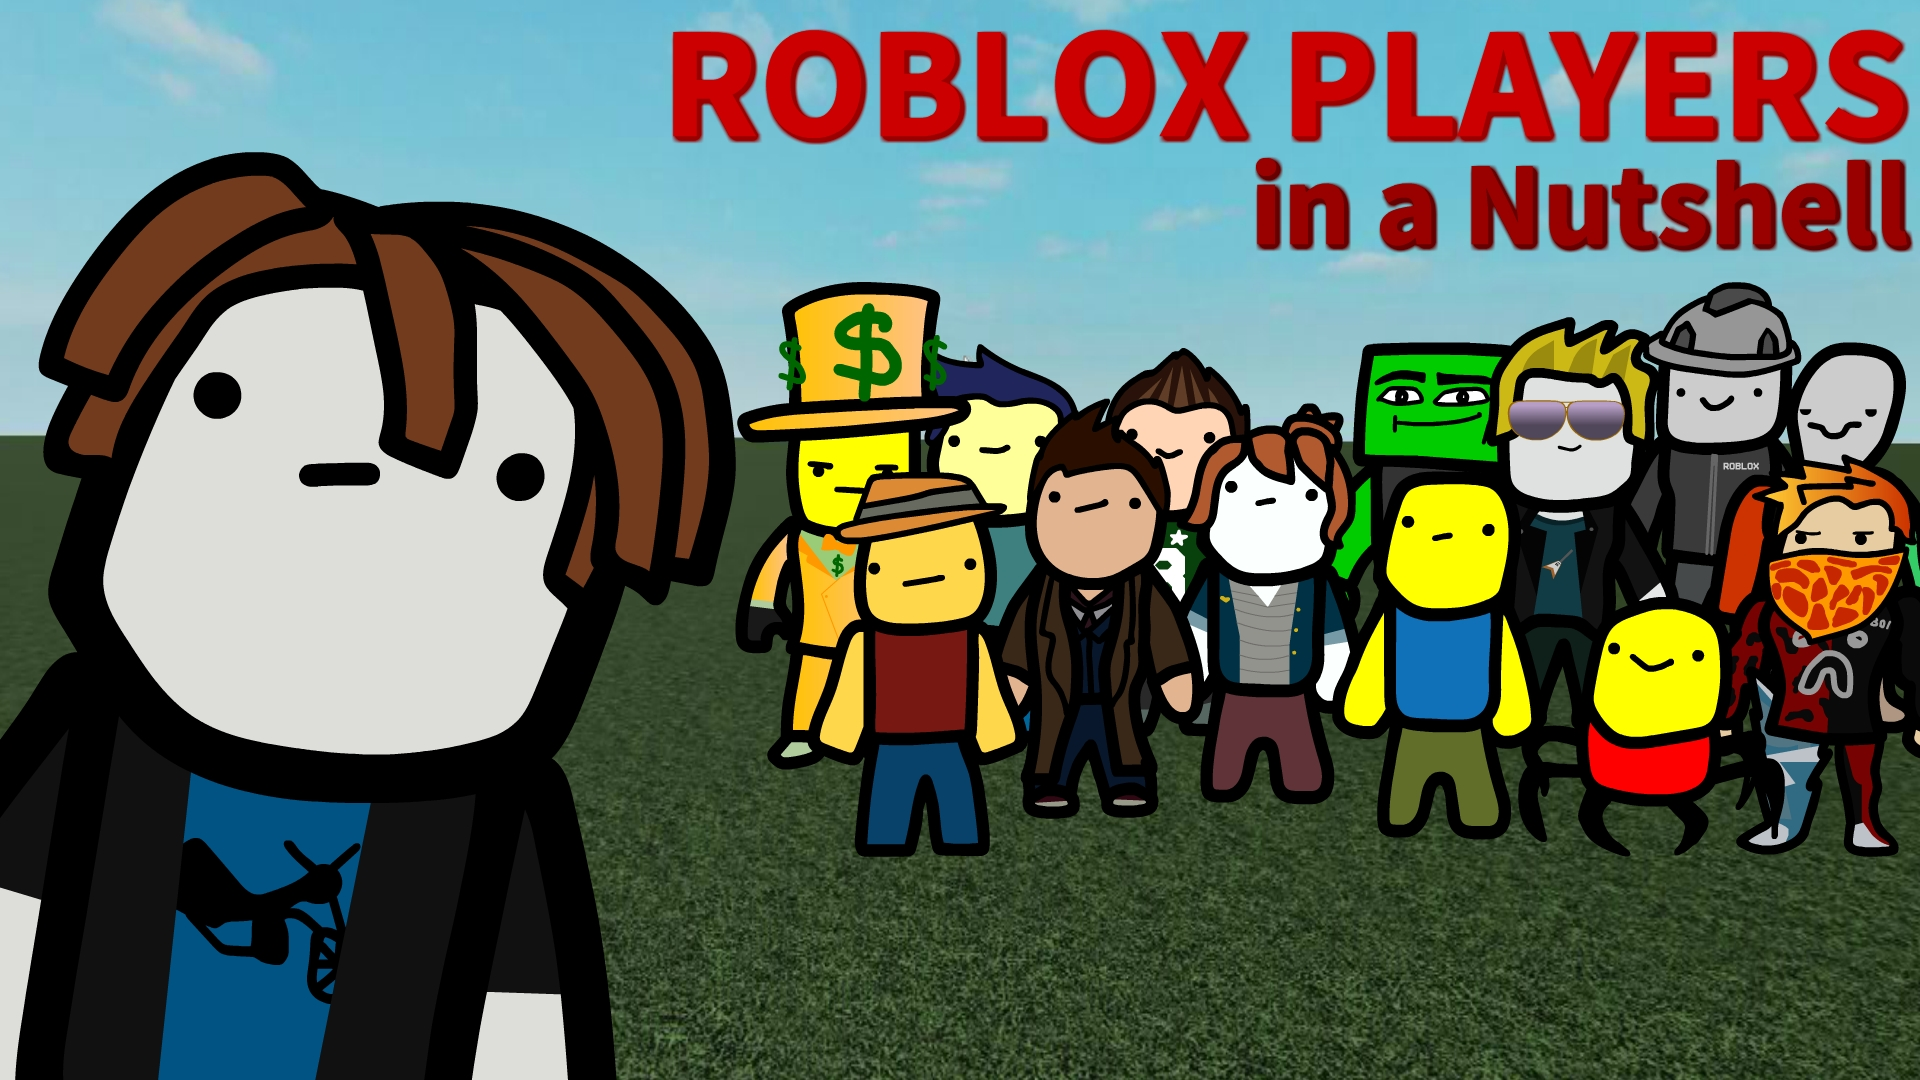 Roblox Images Of Players